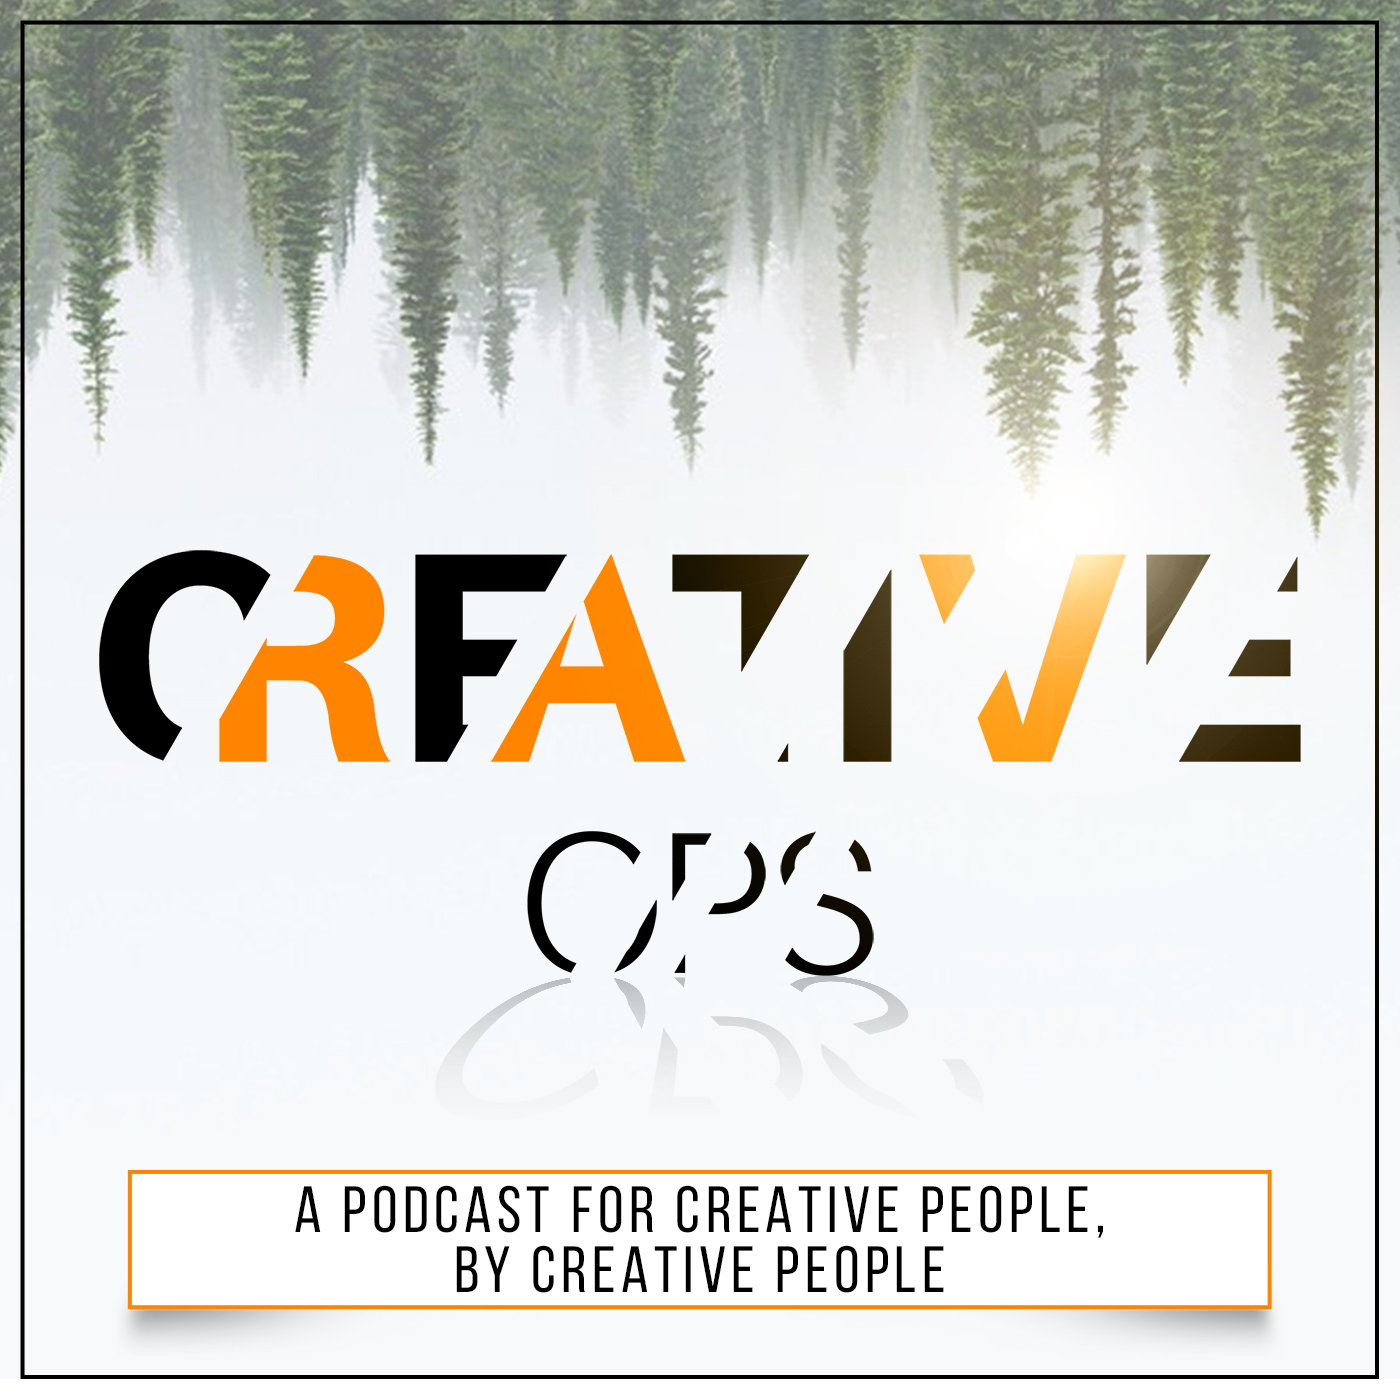 A Podcast for Creative People, by Creative People